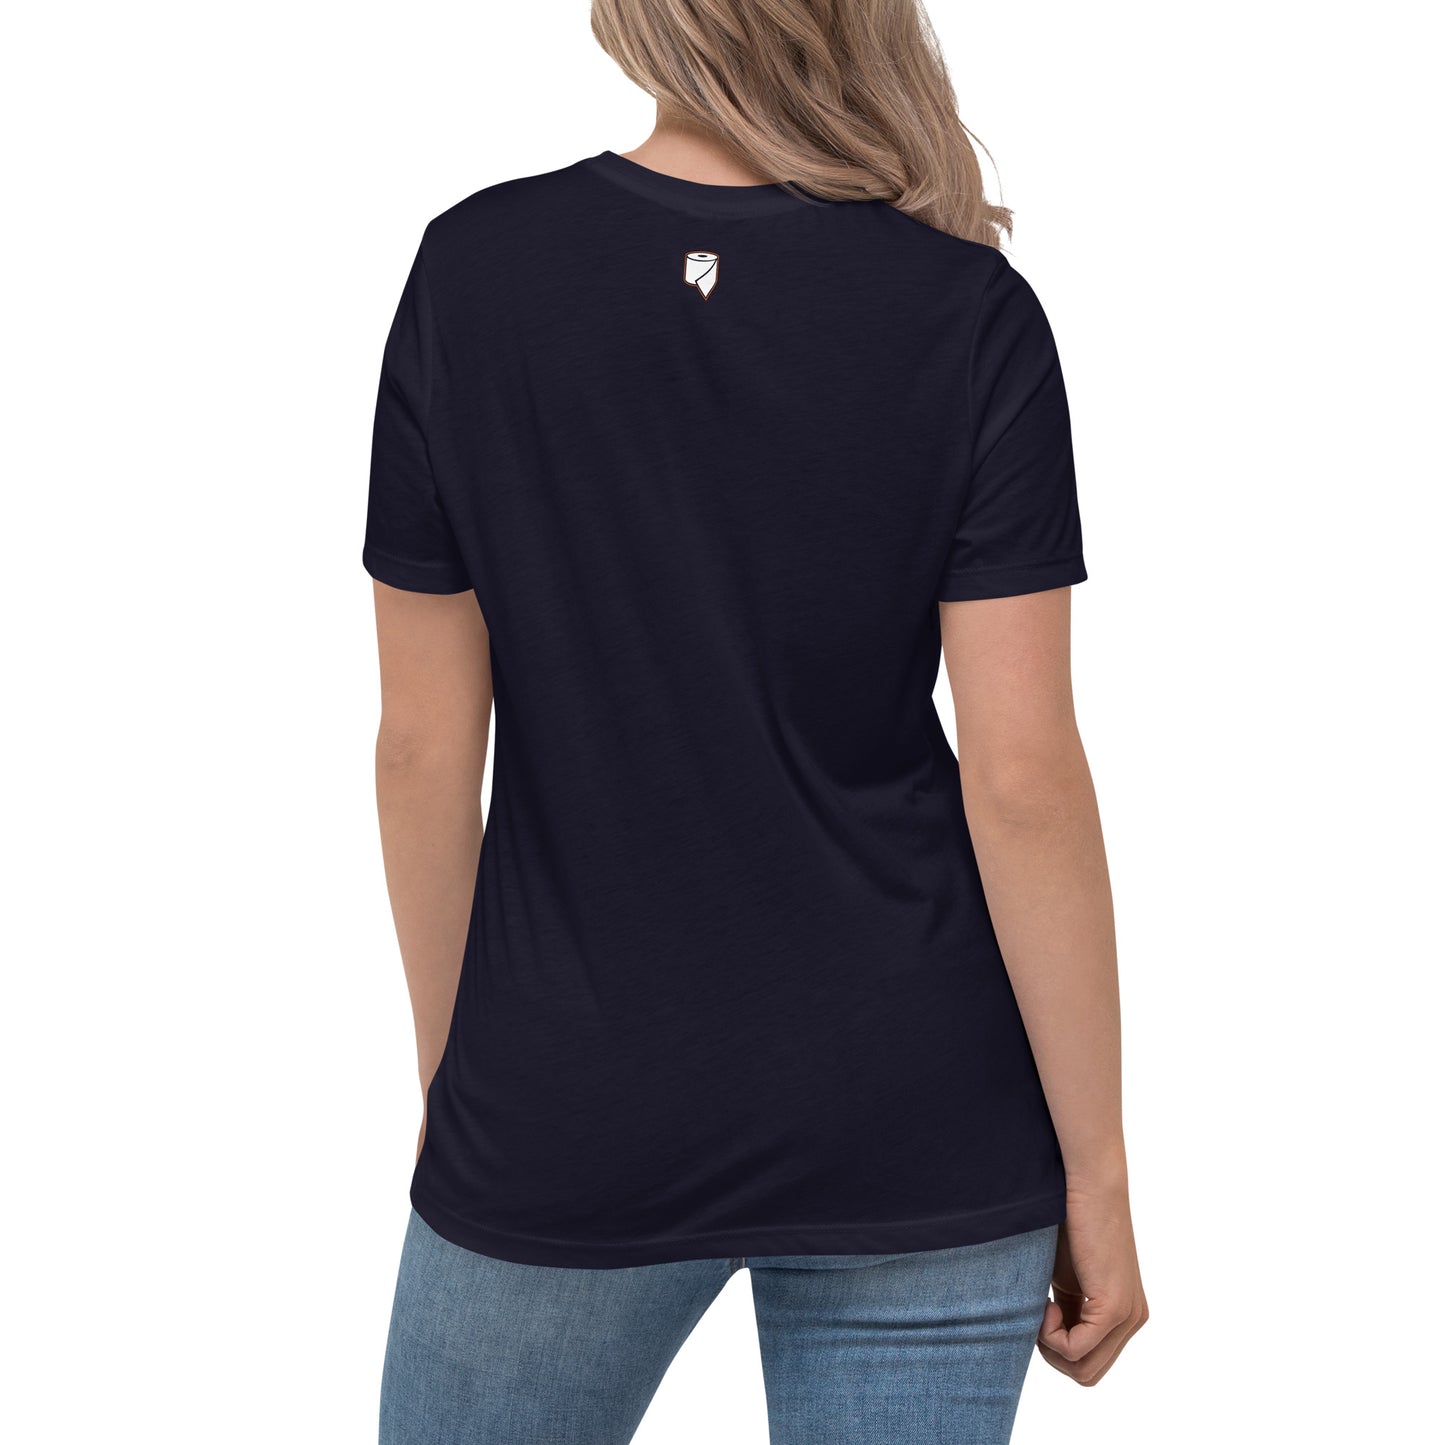 Women's Navy Bella T-shirt - Rolling in Tradition State Logo